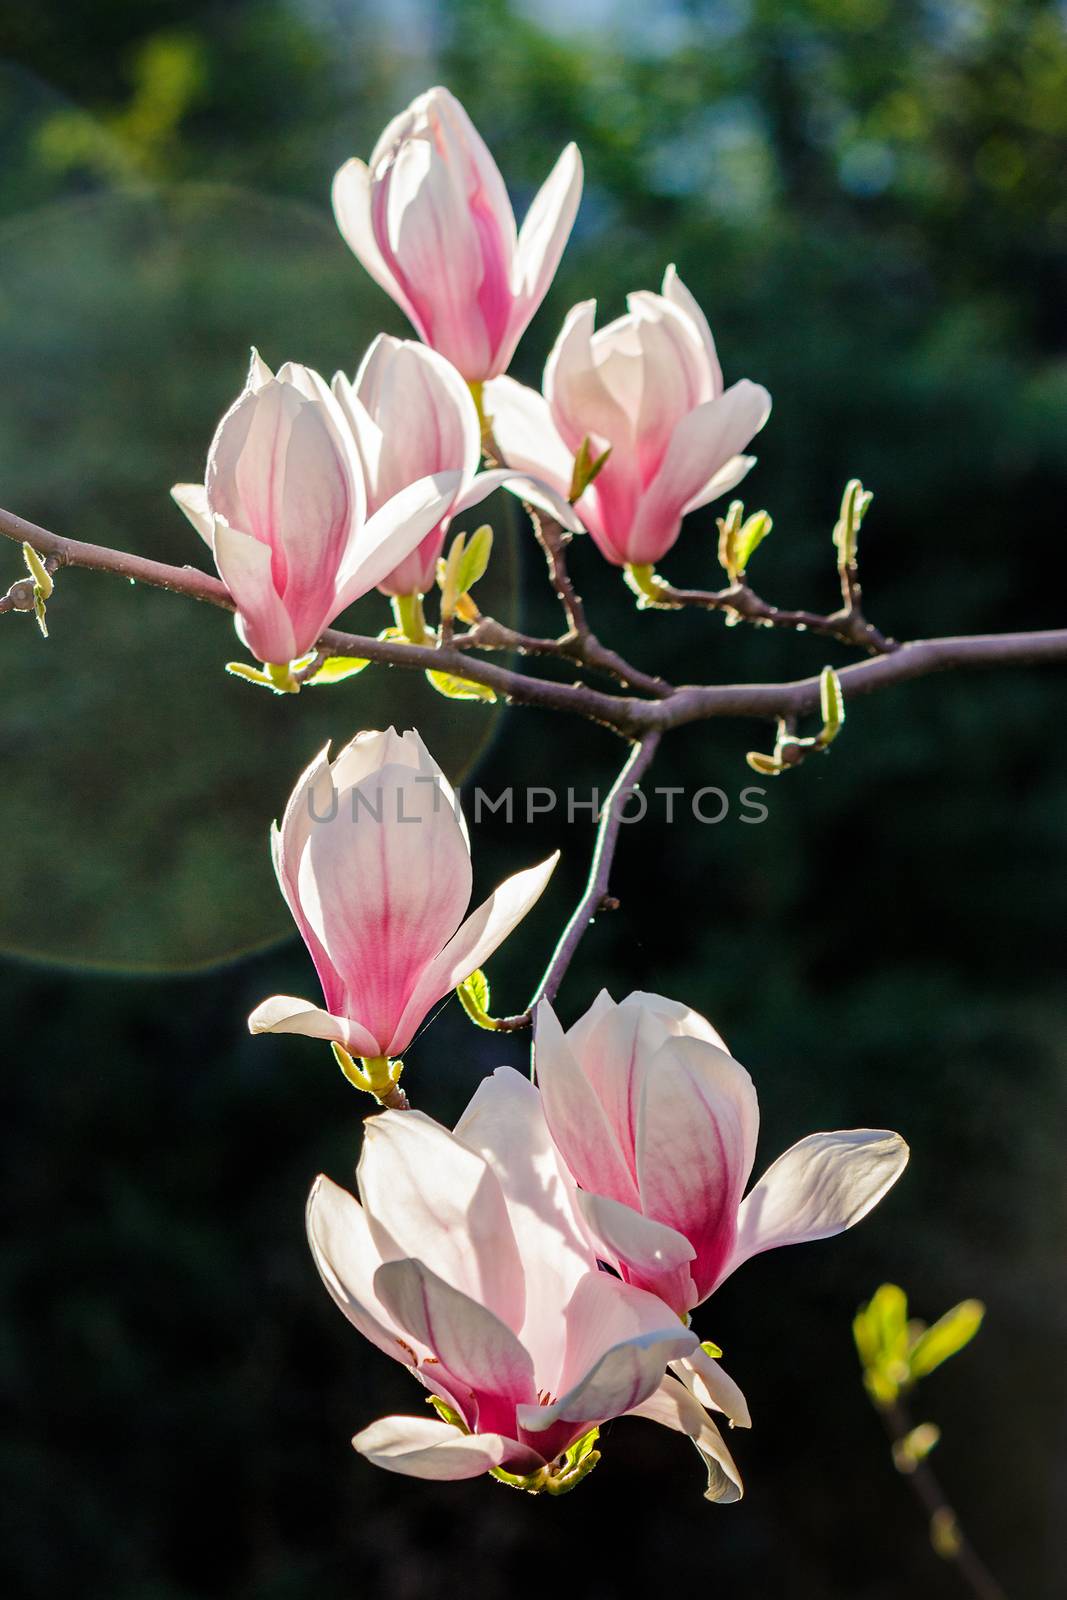 magnolia flowers close up on a blurred  background by Pellinni